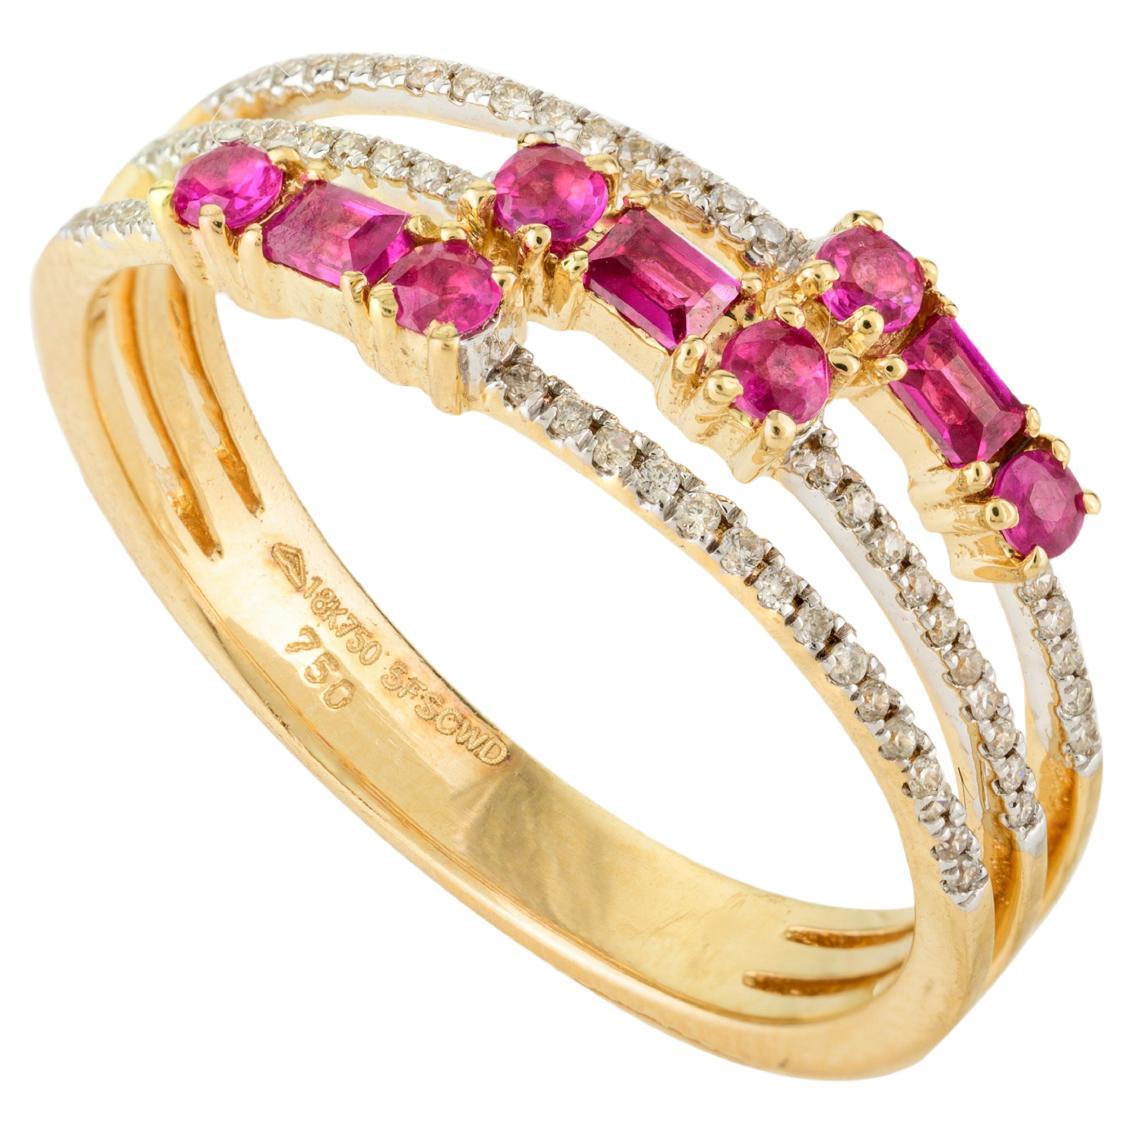 For Sale:  Designer Ruby Diamond Wedding Band Ring Gift for Mom in 18k Yellow Gold